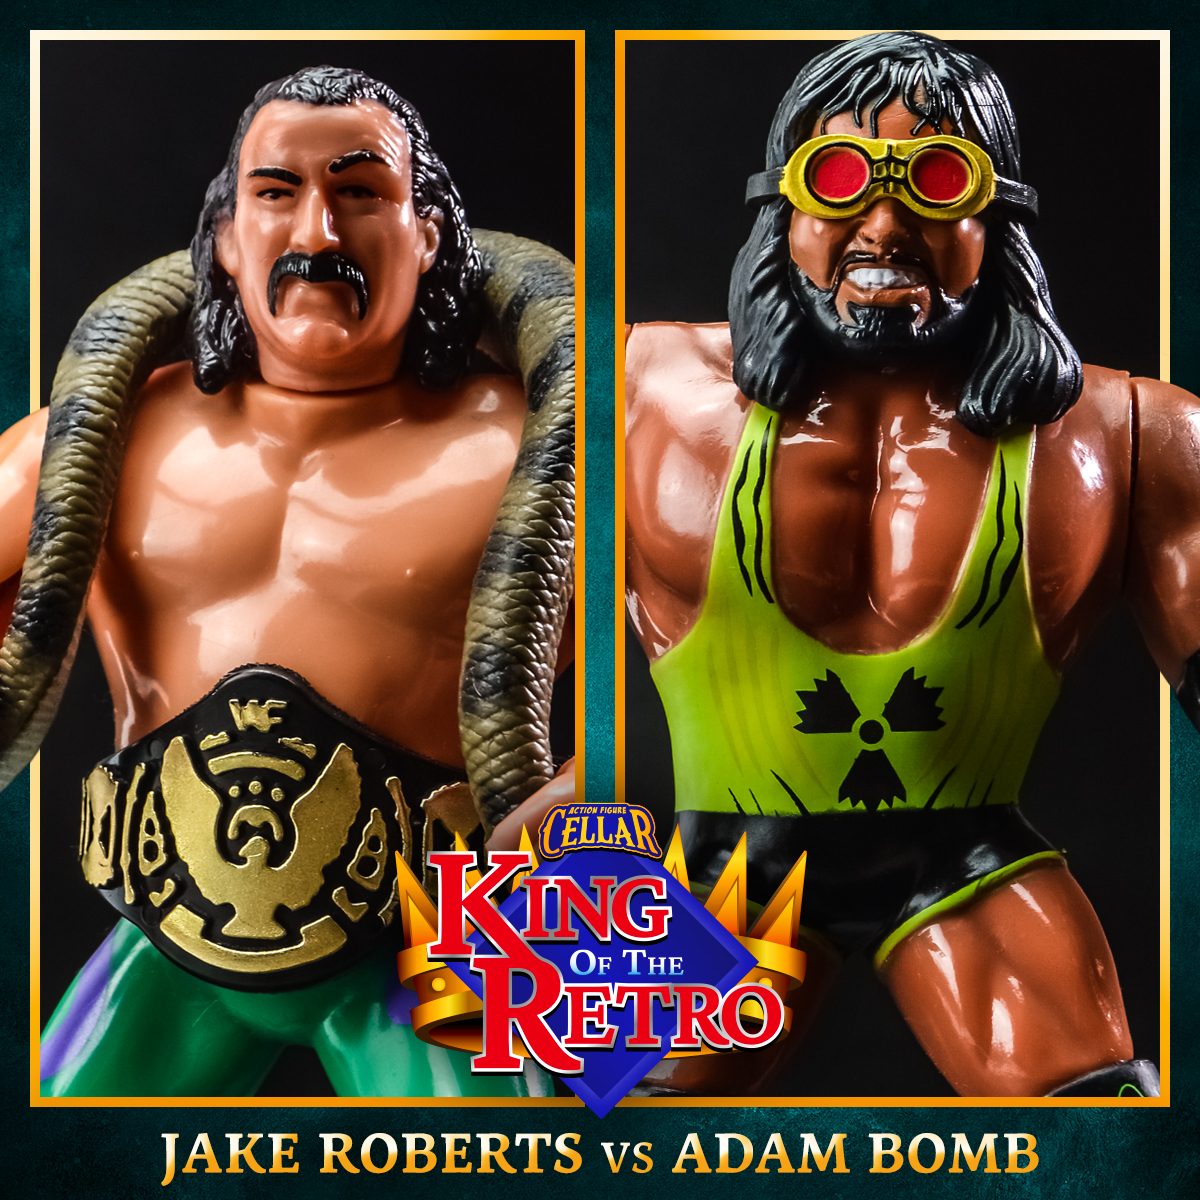 This is it, the final match of this year's #KingOfTheRetro Toynament is
@JakeSnakeDDT vs @RealBryanClark
 
Please vote below with who you would like to win. Votes will be counted across all my social media accounts.

#hwo #wwfhasbro #chellatoys